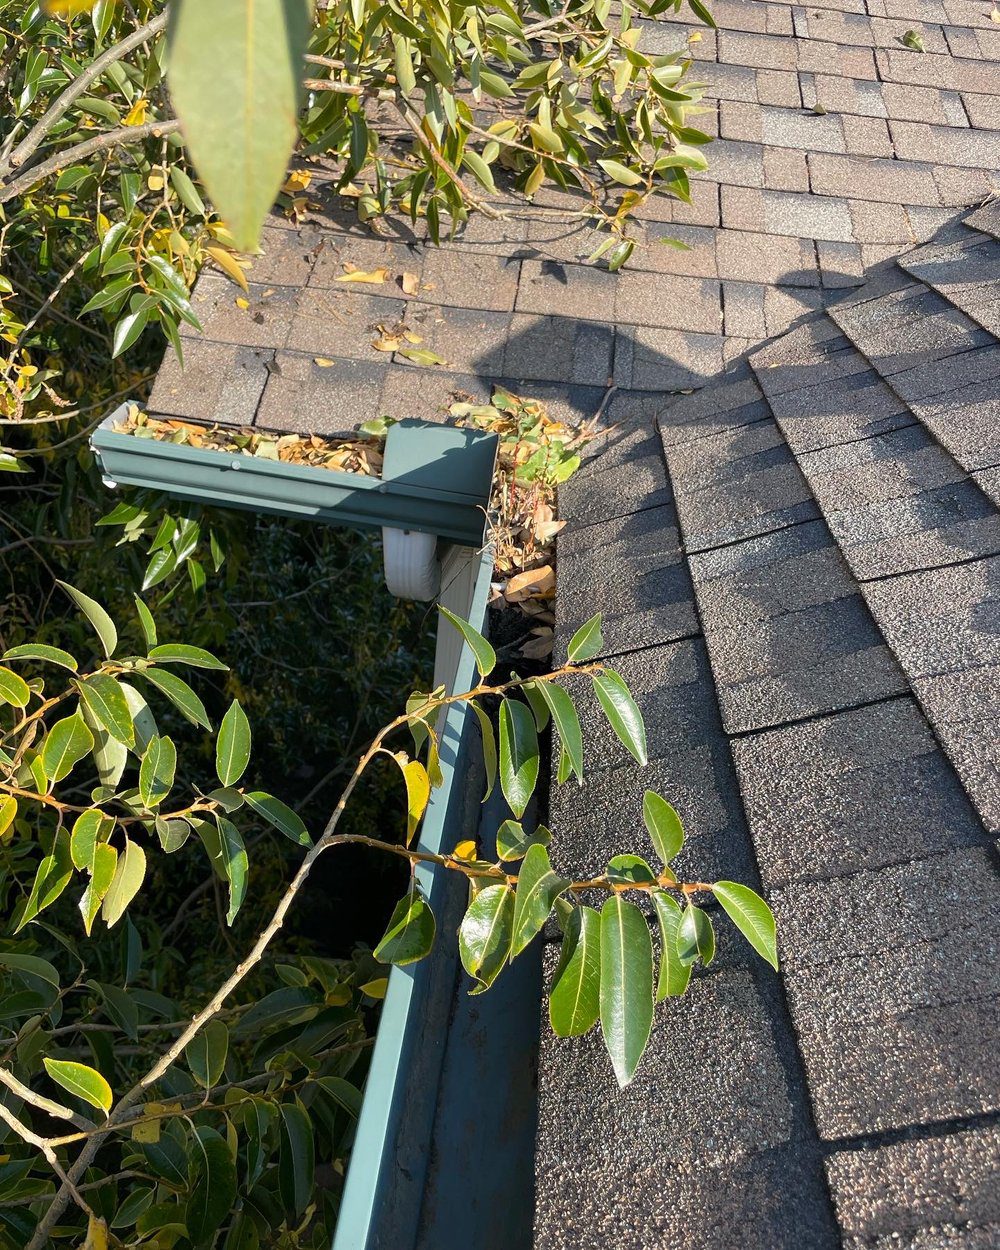 Image of plants and tree branches clogging up home water gutters.